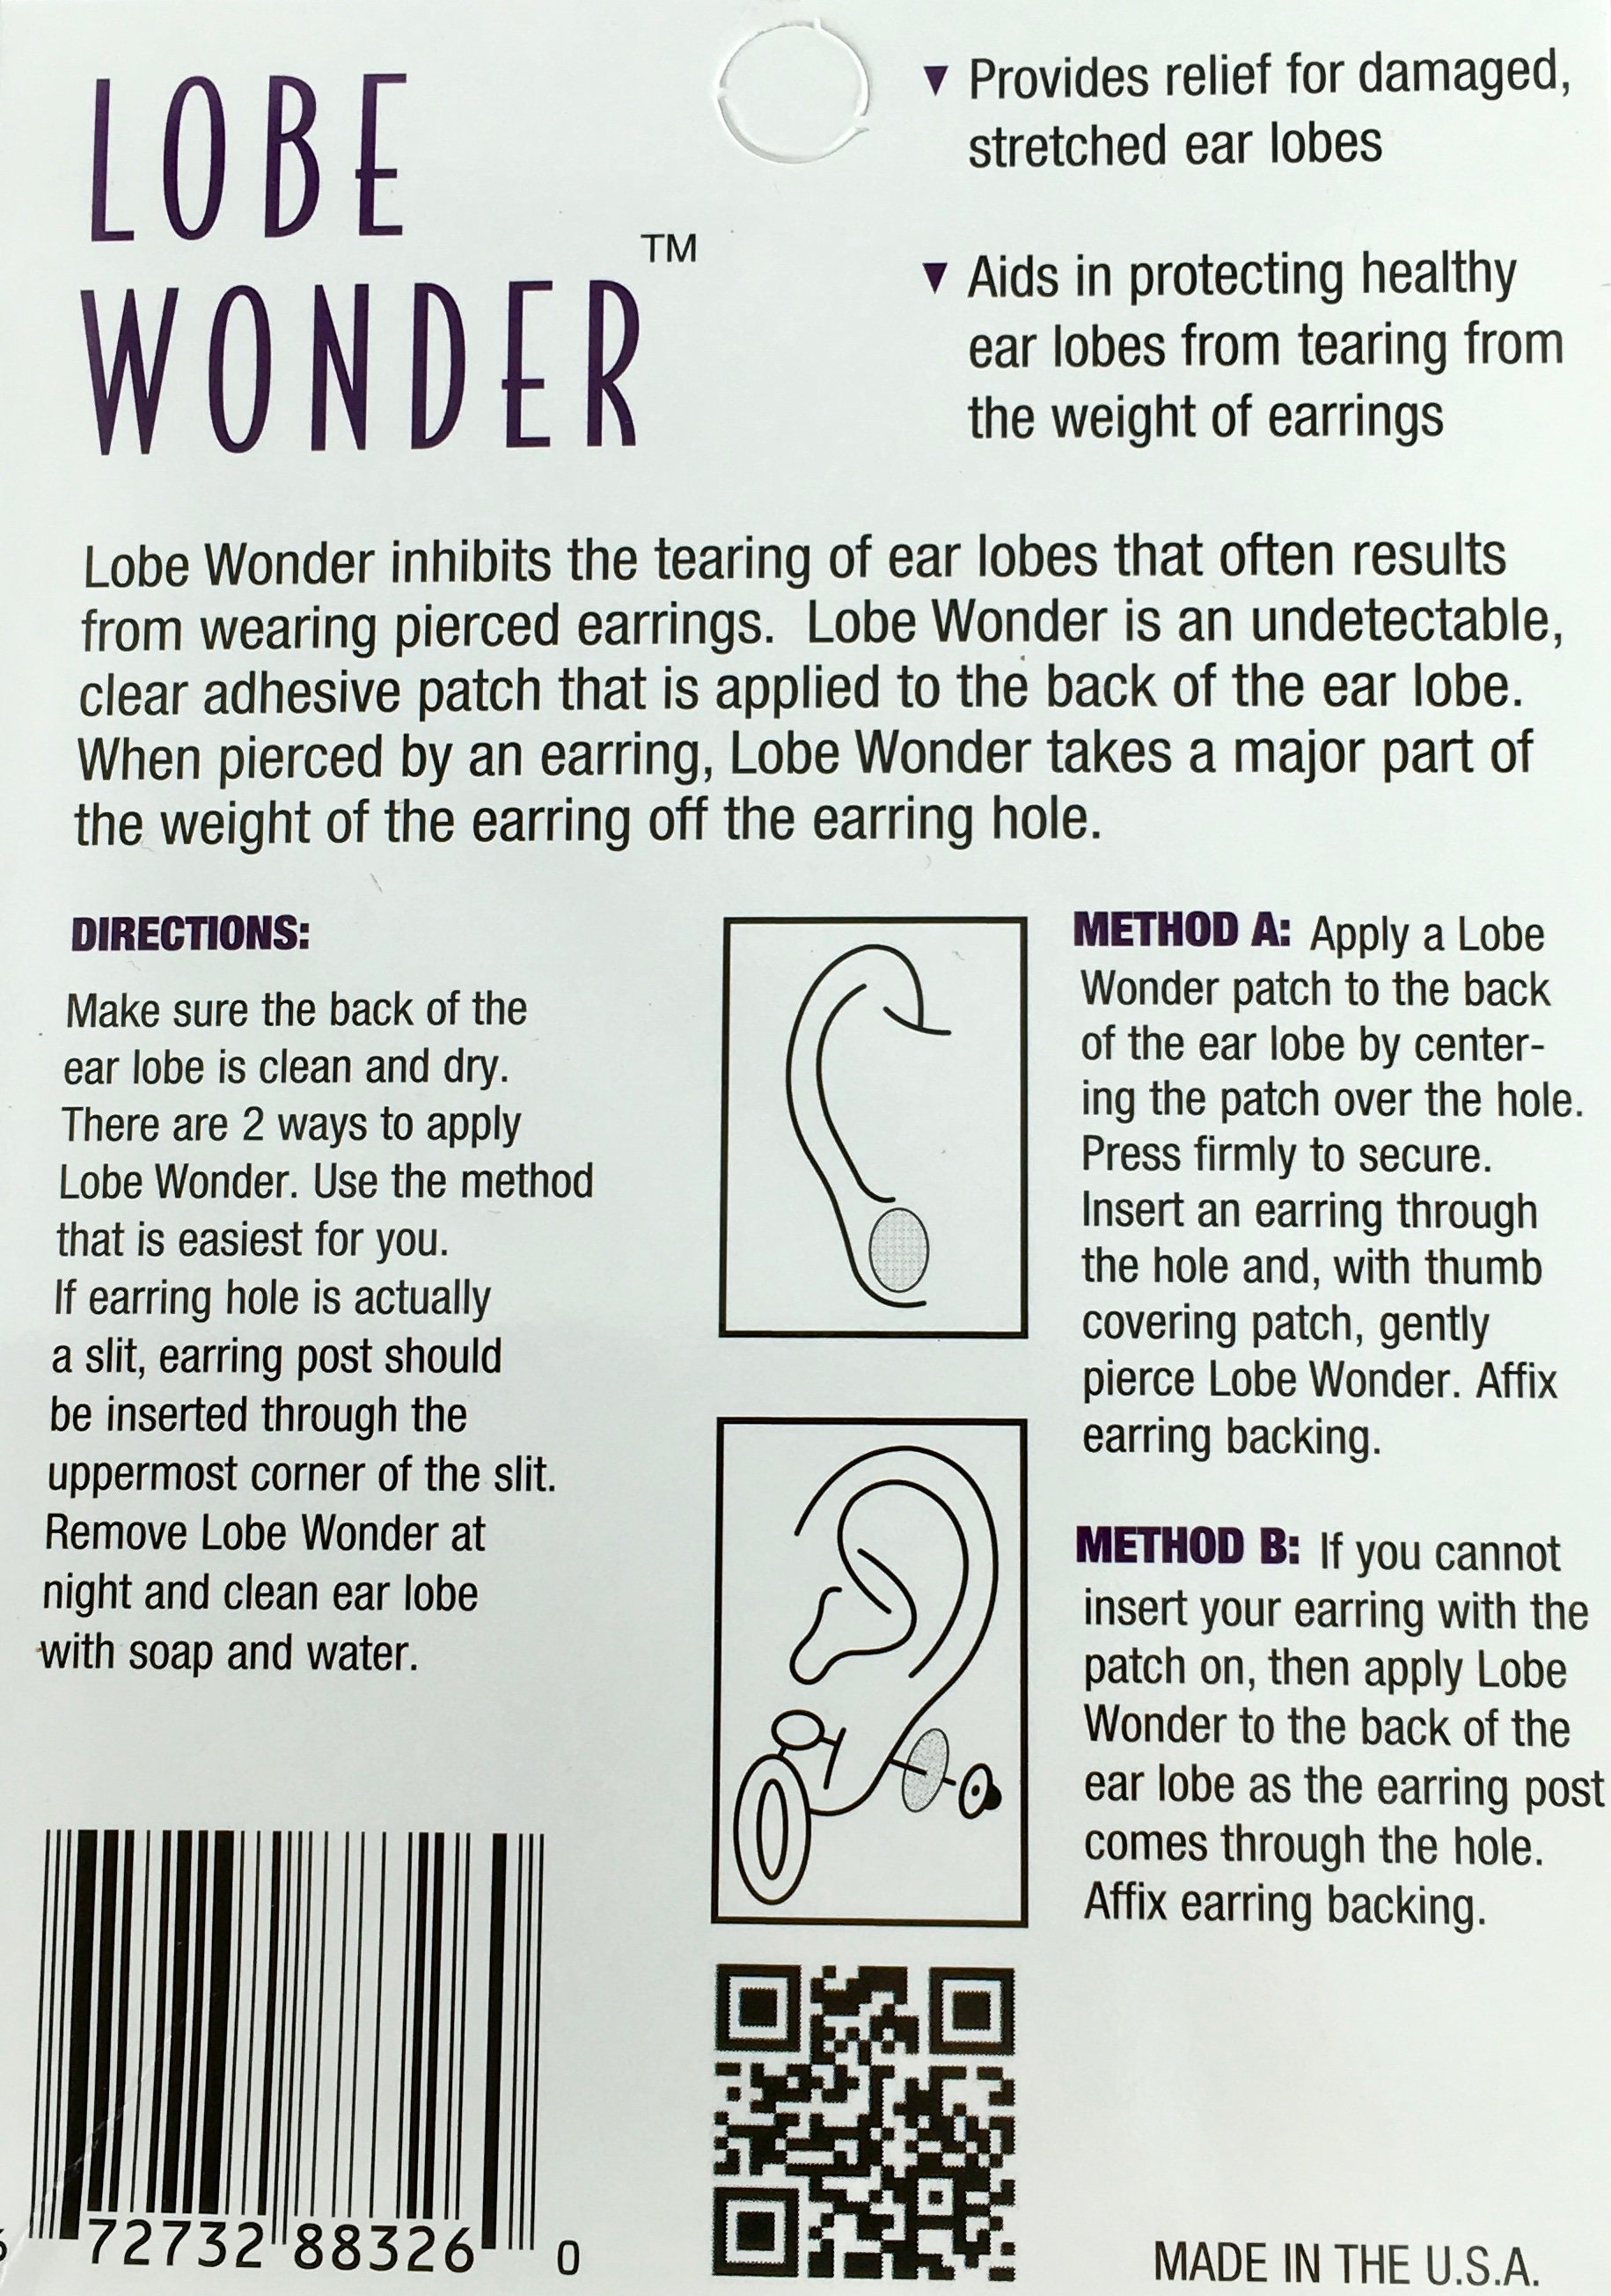 Lobe Wonder Ear Lobe Support Patches for Earrings Appx 120 Patches